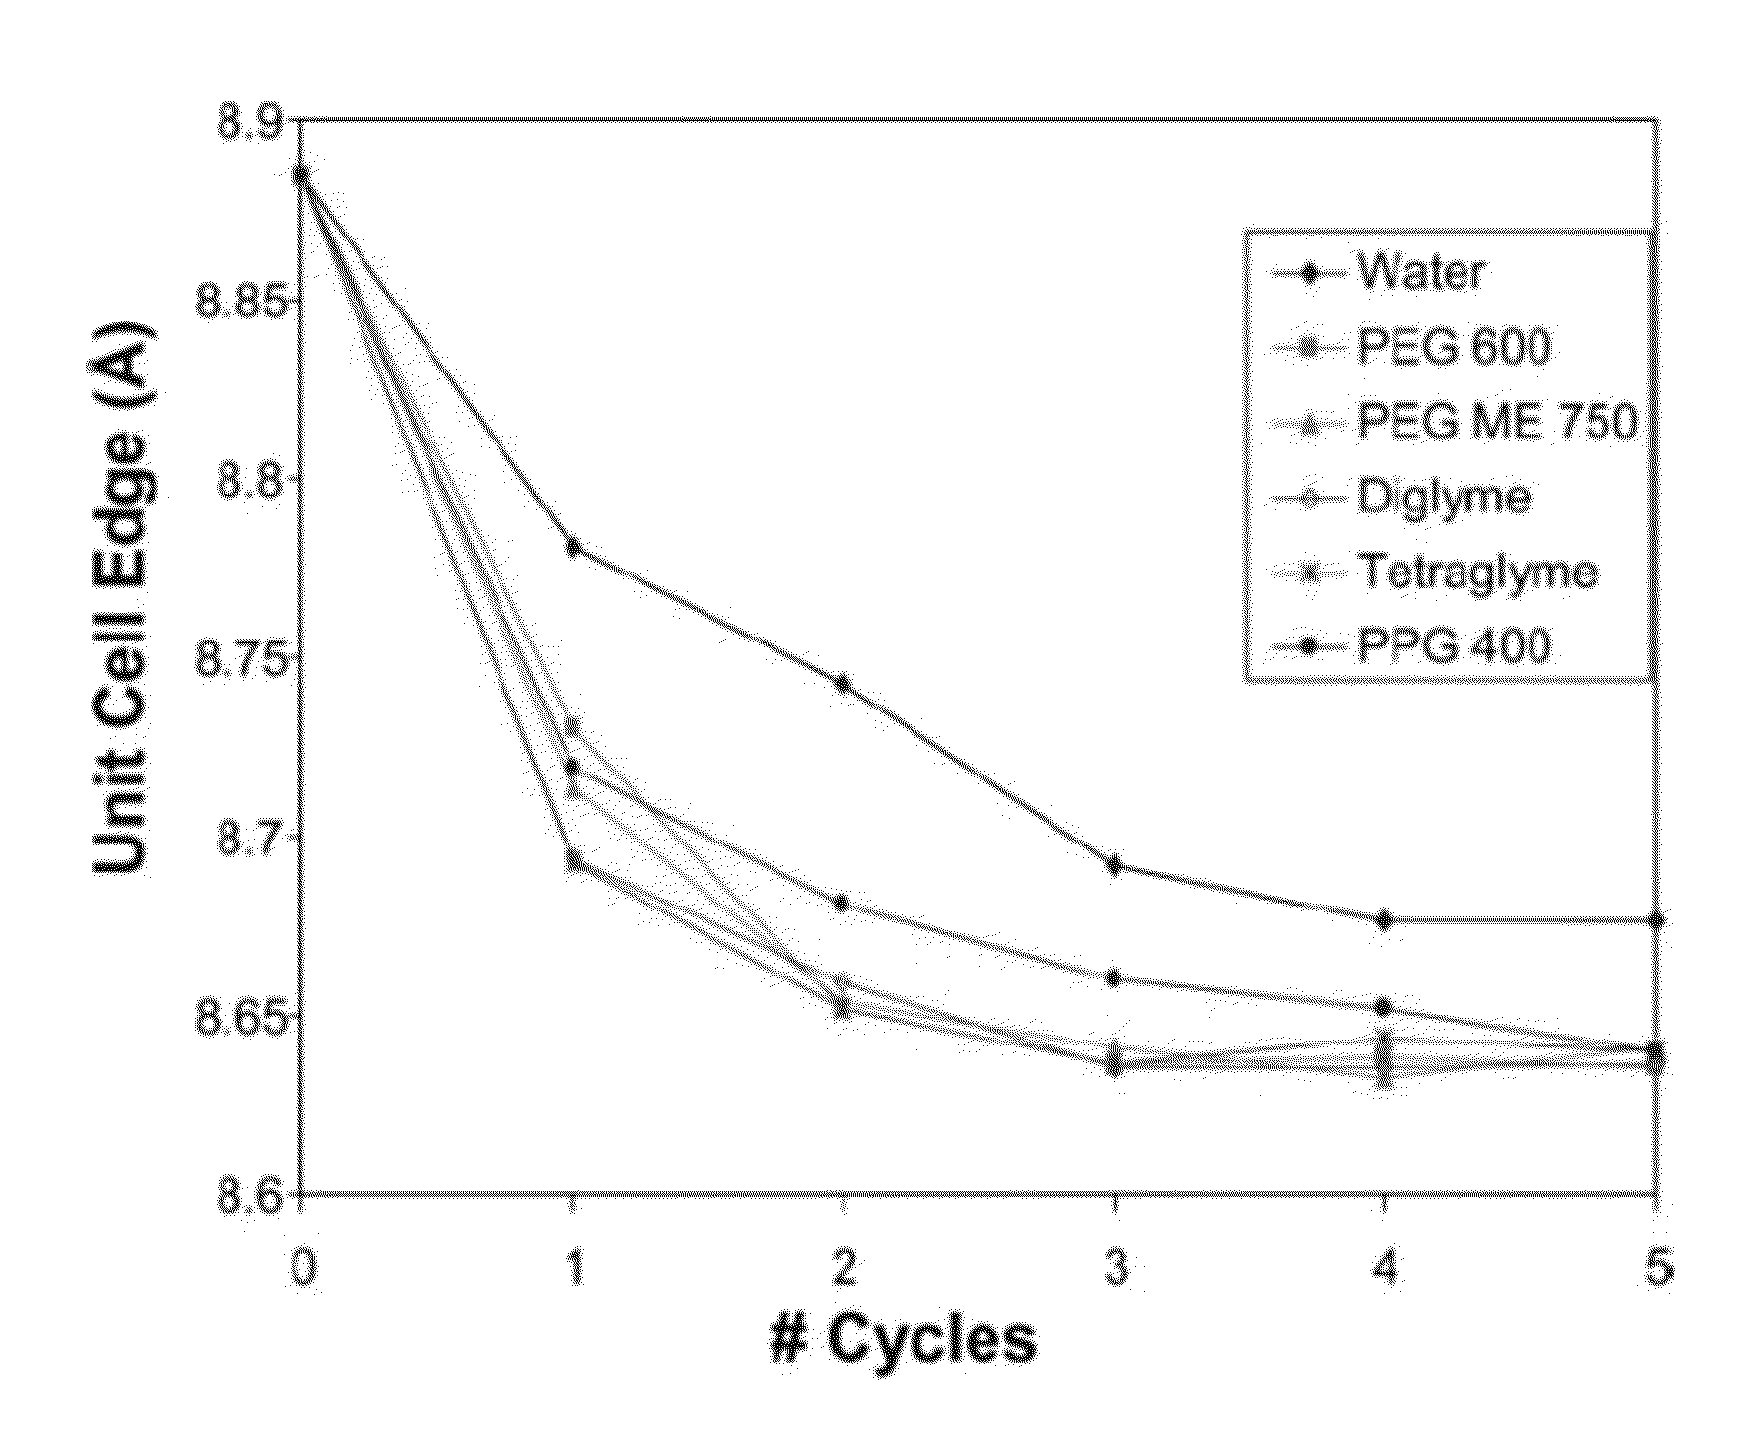 Formulation and method for improved ion exchange in zeolites and related aluminosilicates using polymer solutions